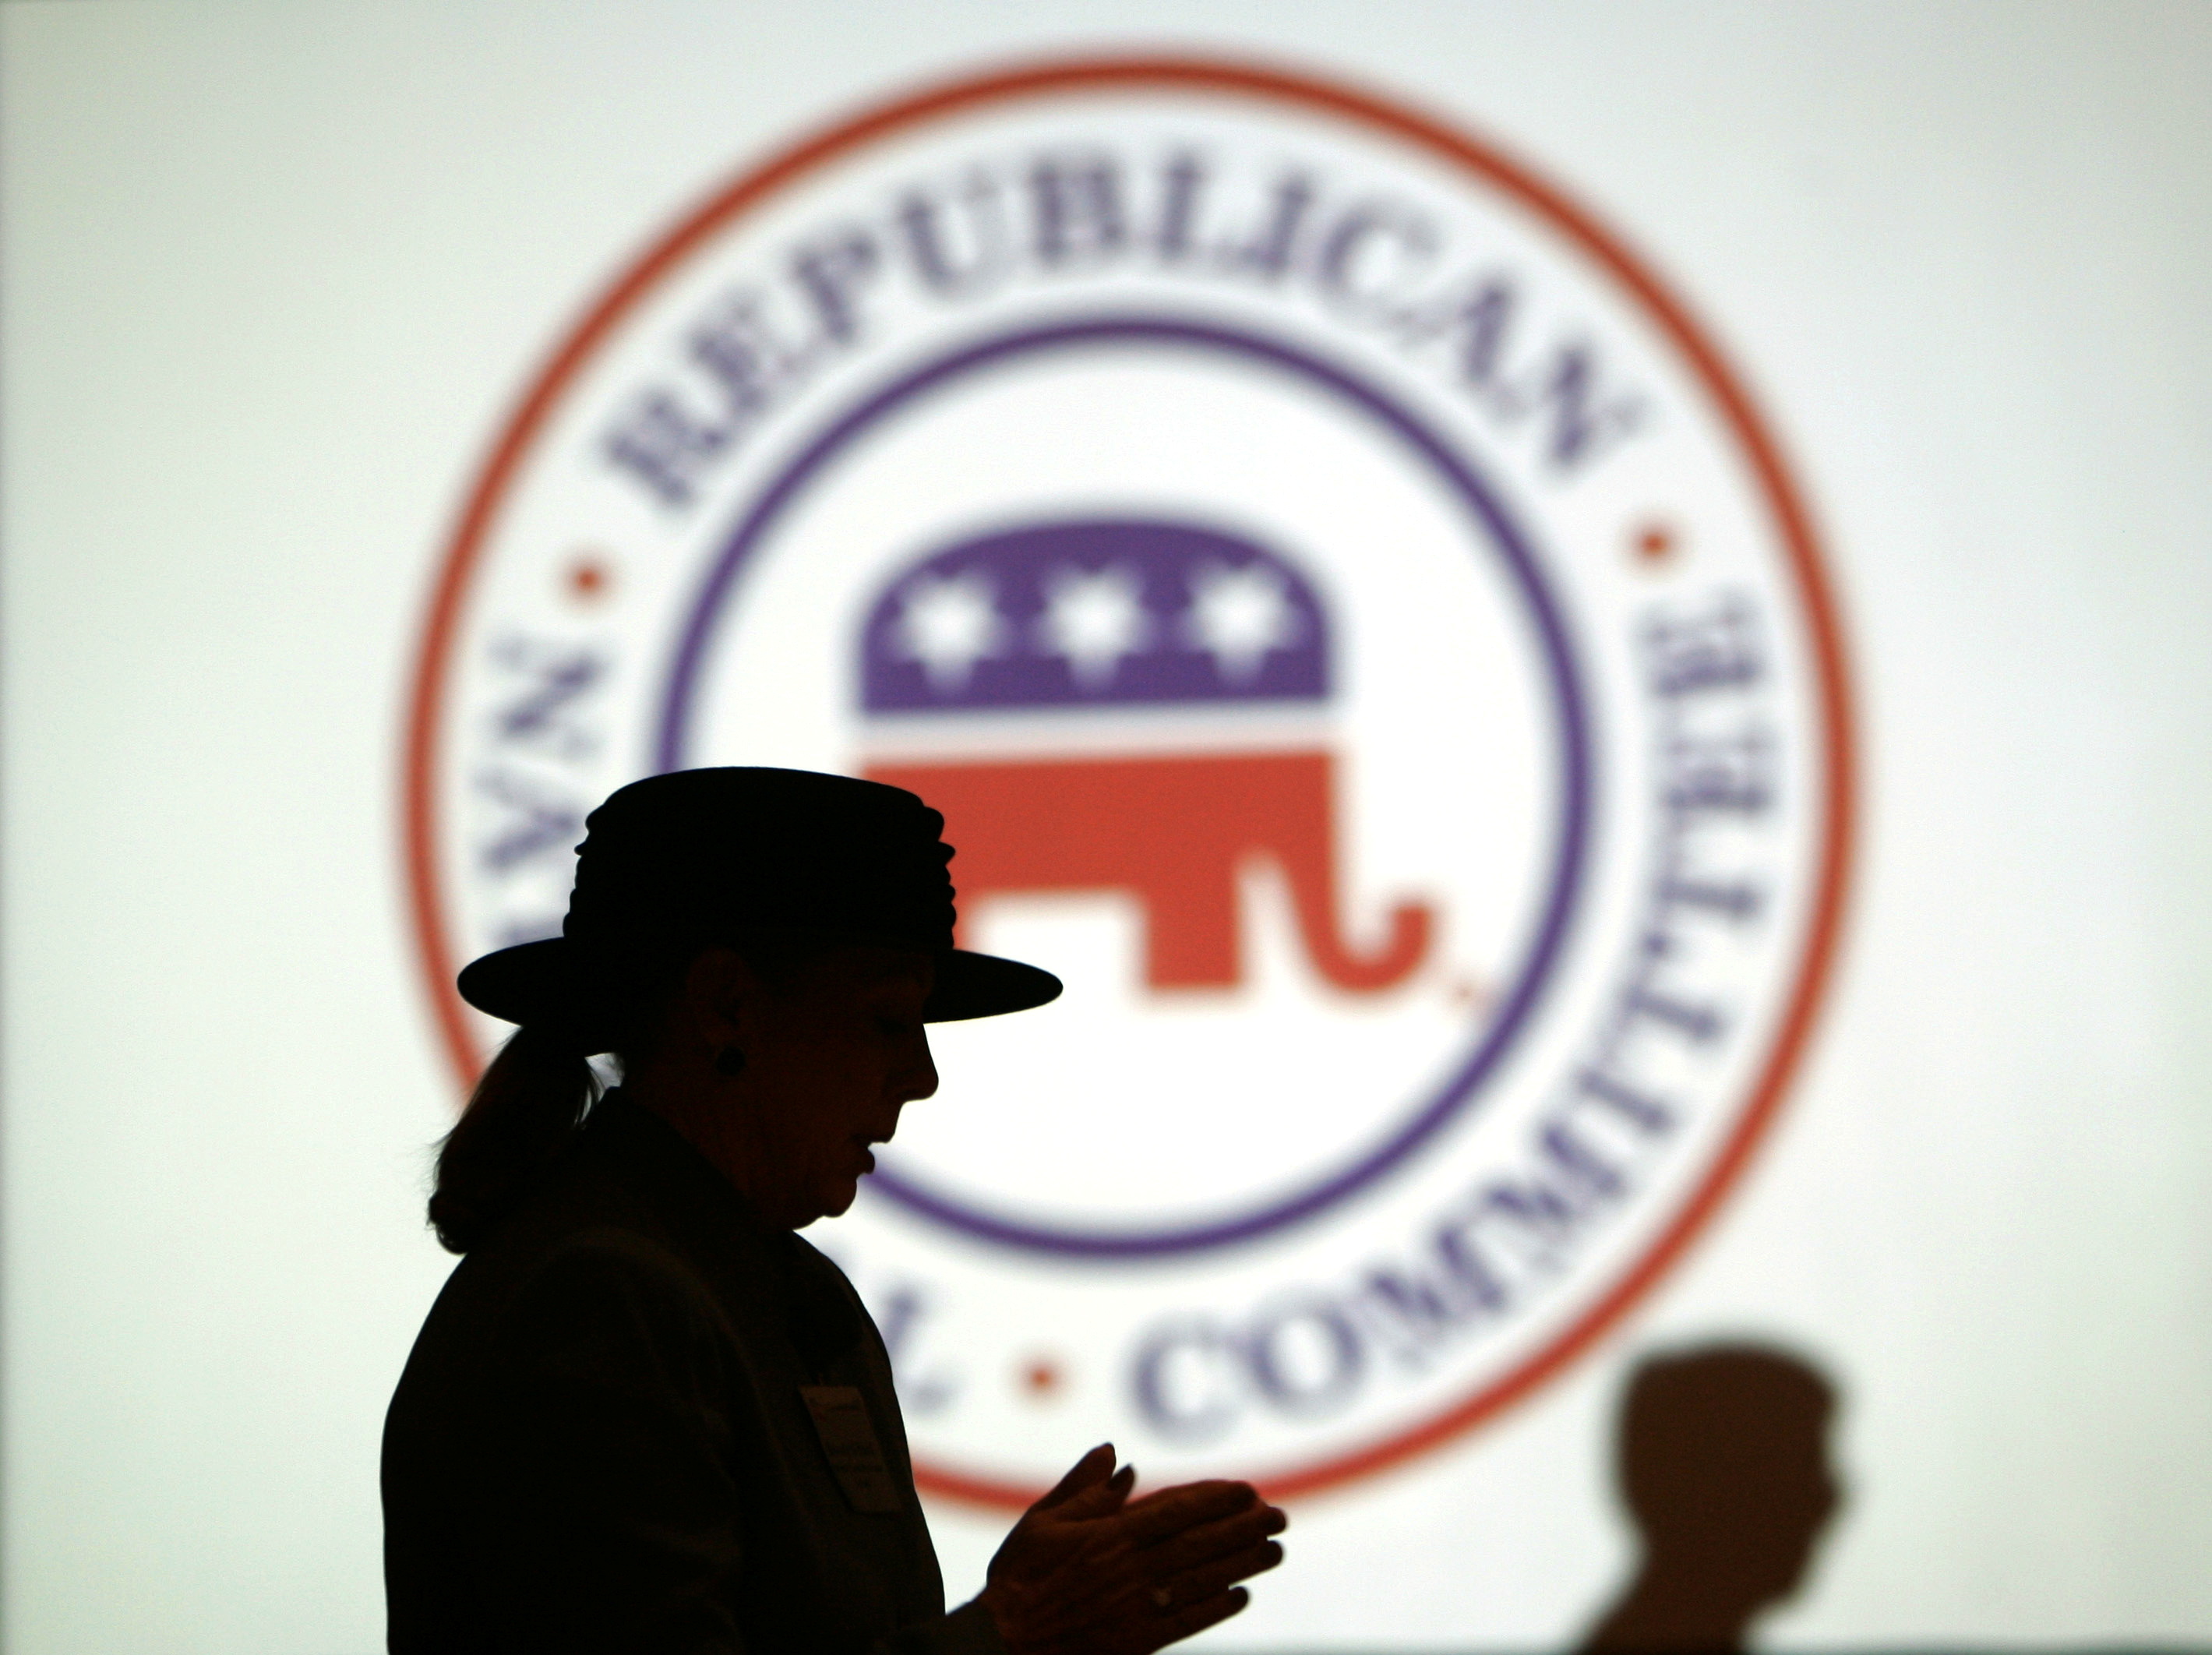 Republican Party members are silhouetted against RNC logo during a meeting in Washington